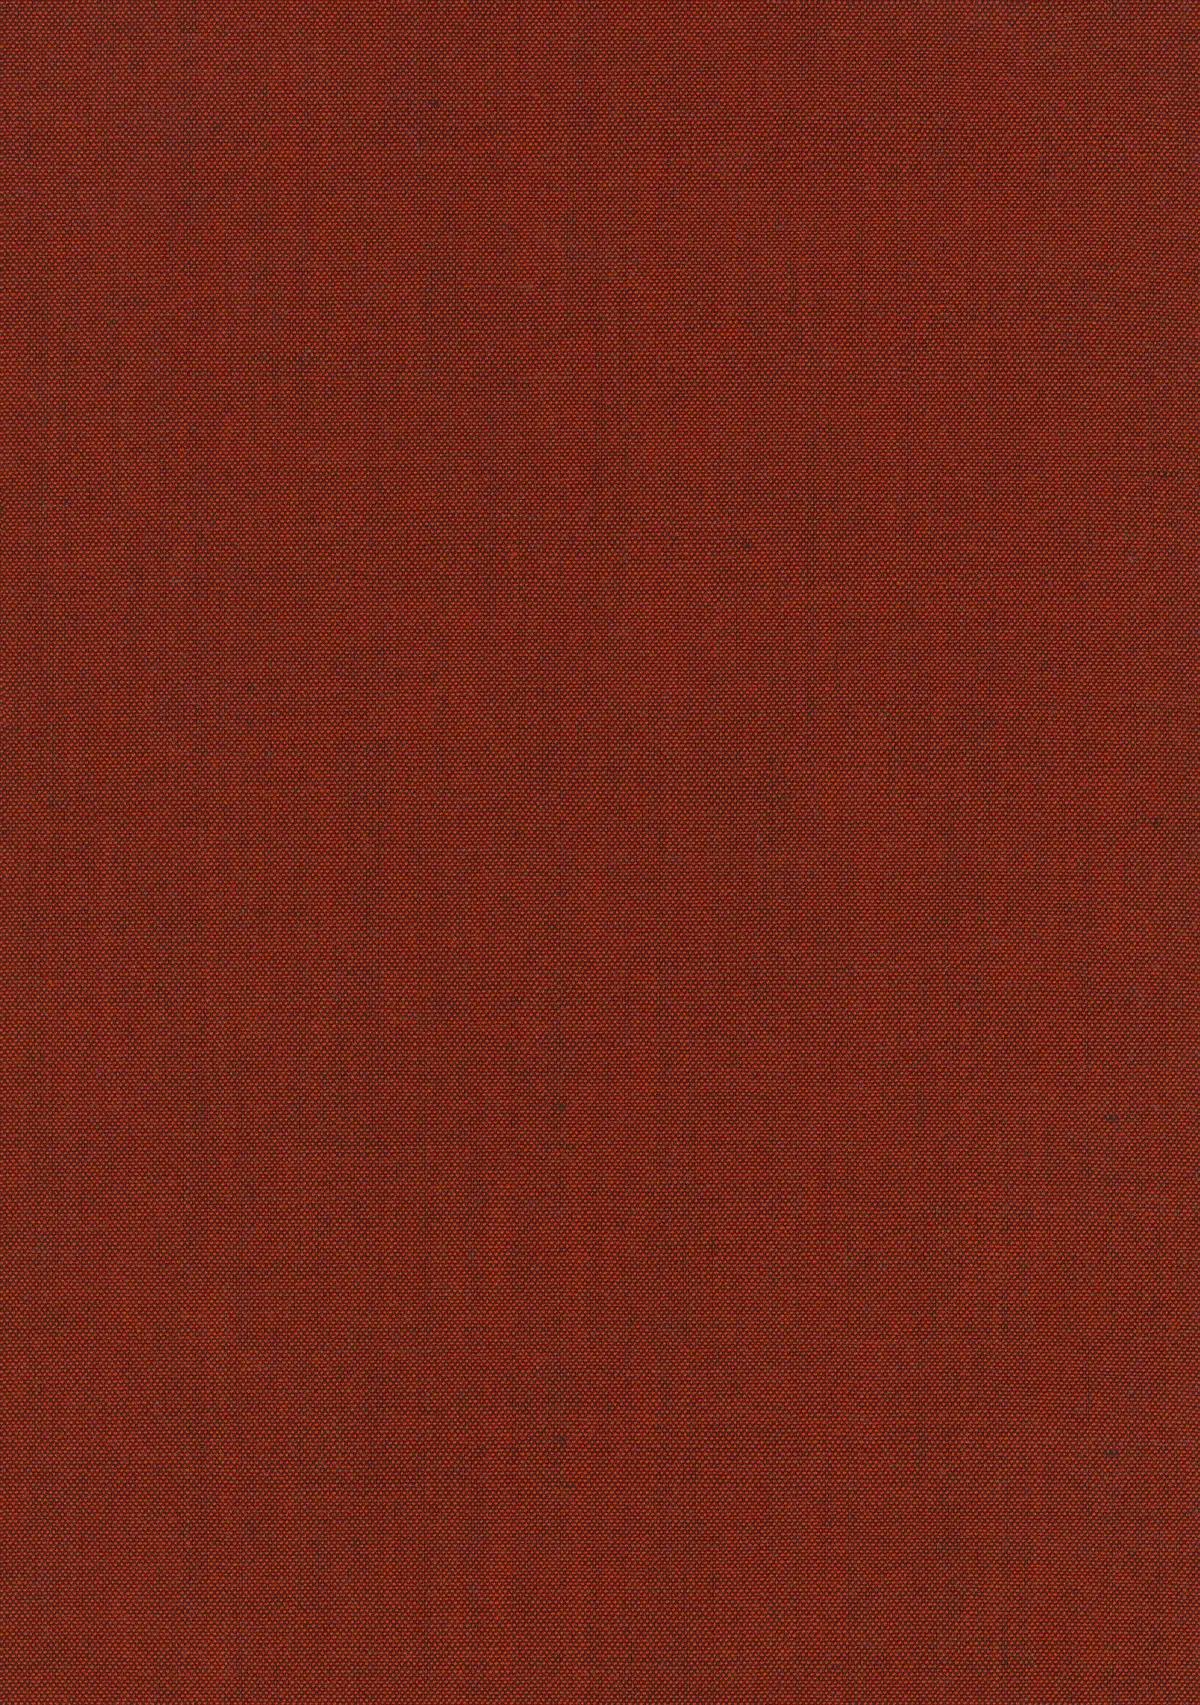 Fabric sample Remix 3 566 red